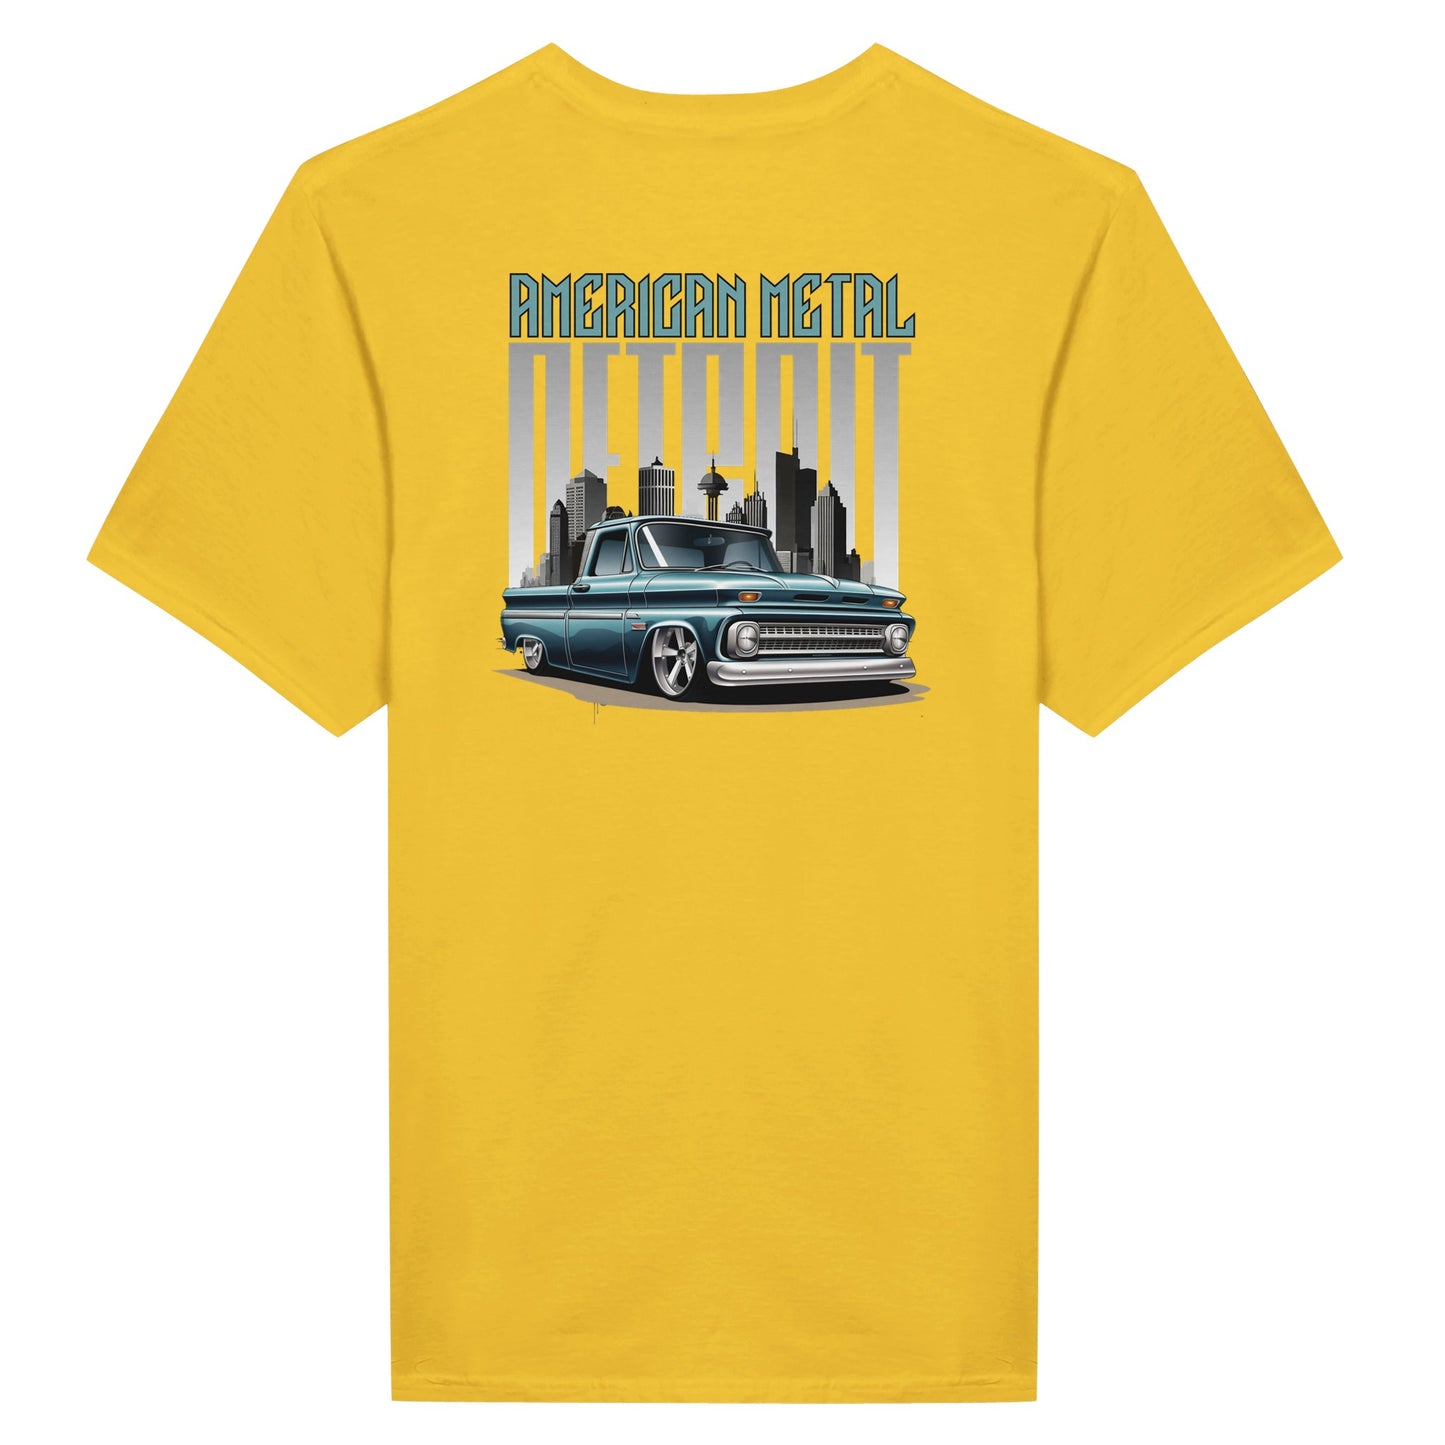 a yellow t - shirt with an image of an old car